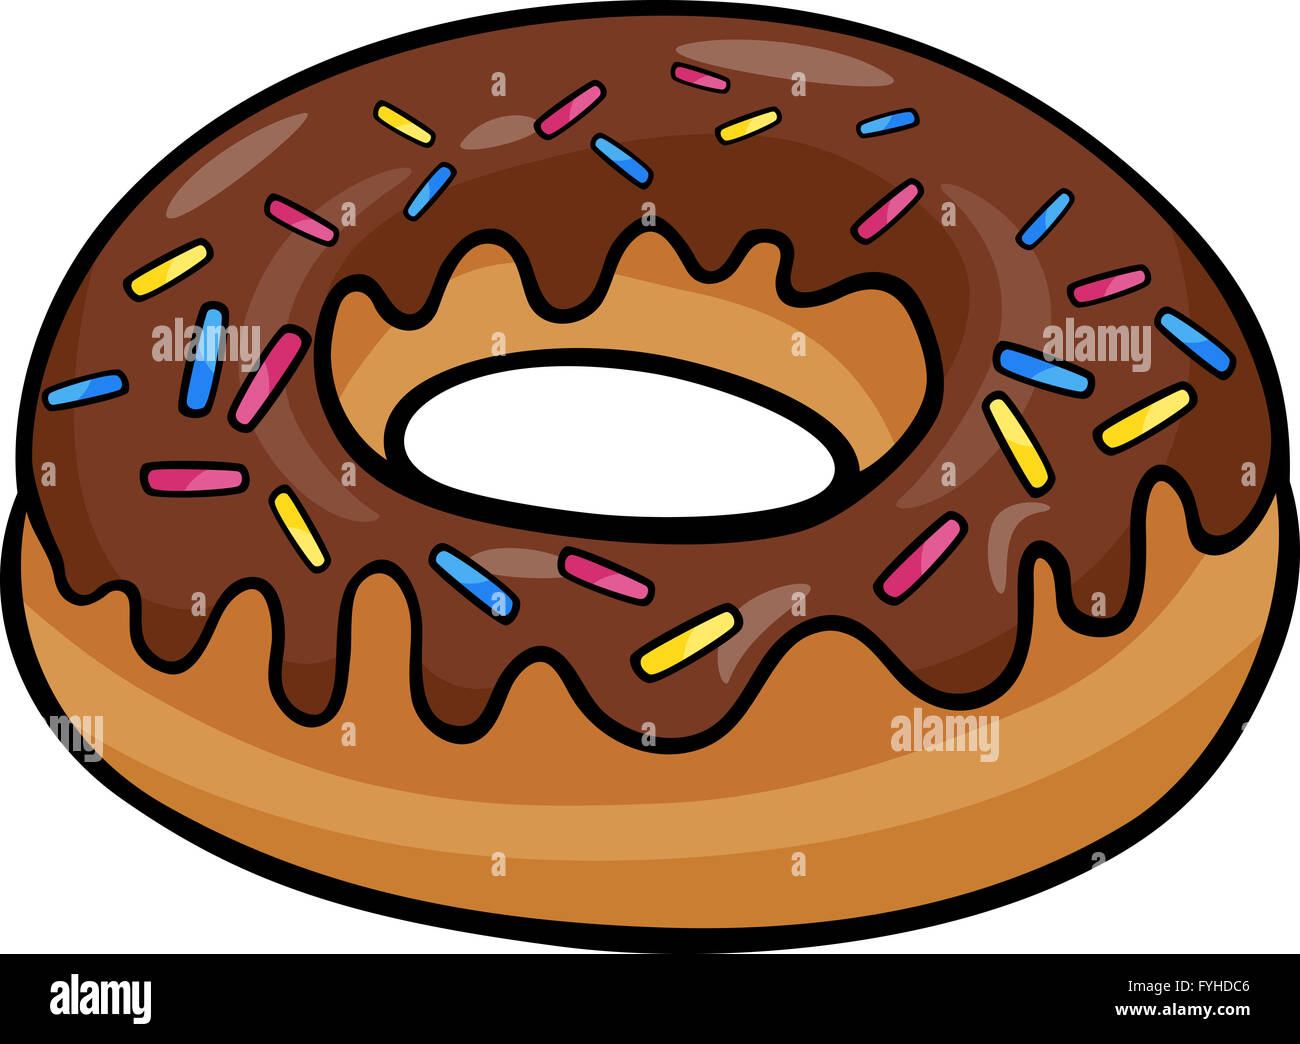 clipart of donut